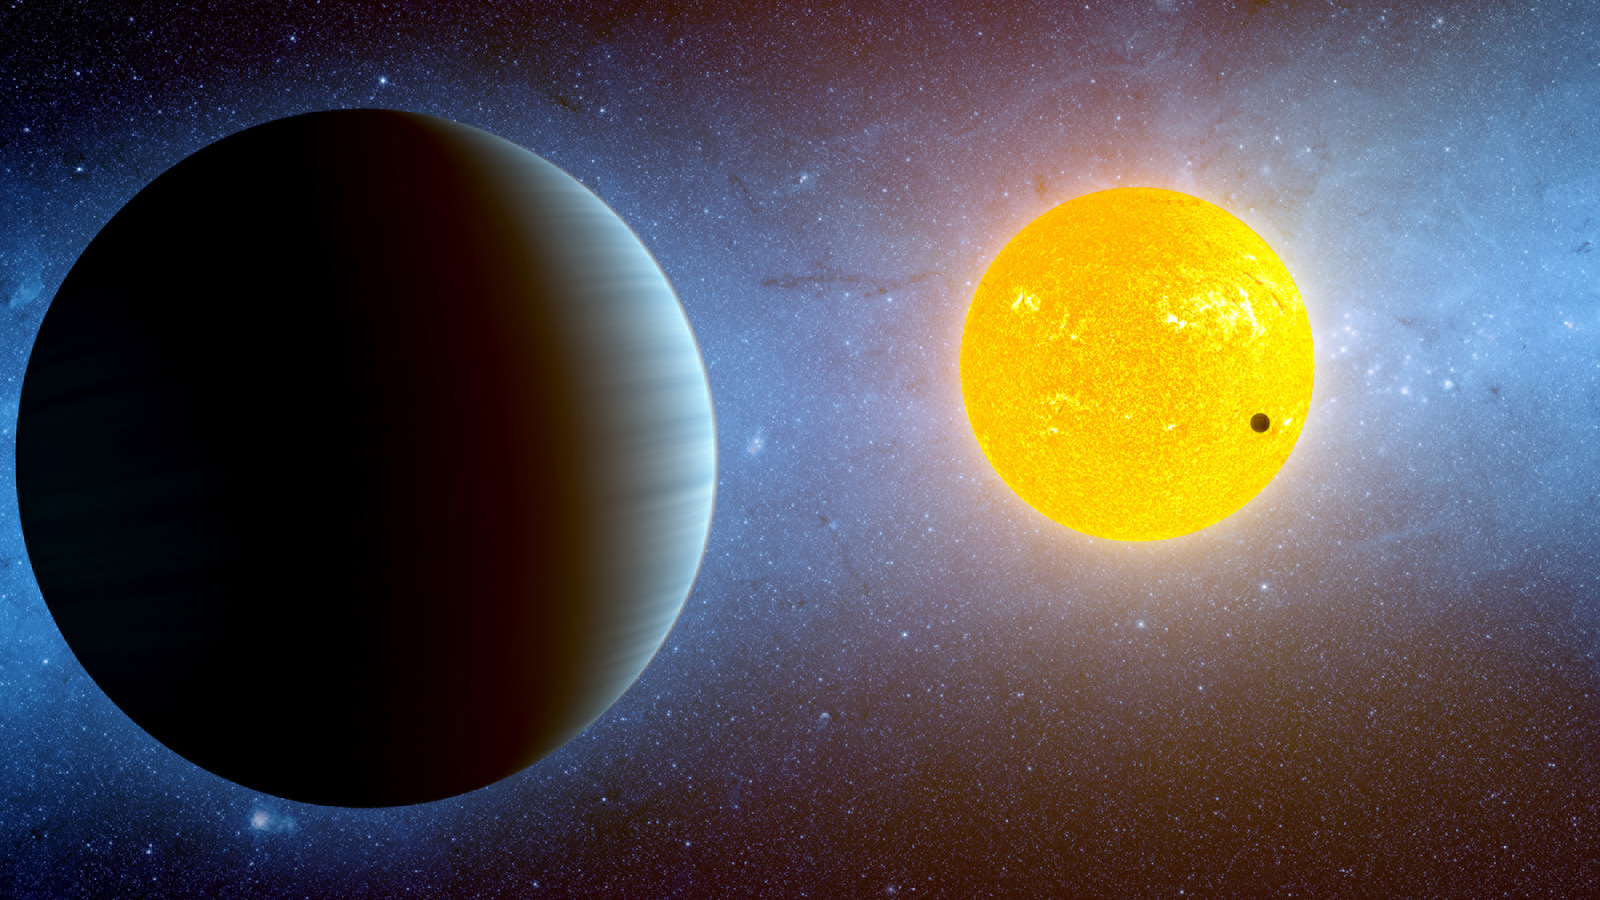 slide 3 - This artist's conception depicts the Kepler-10 star system, located about 560 light-years away near the Cygnus and Lyra constellations. Kepler has discovered two planets around this star. Kepler-10b is, to date, the smallest known rocky exoplanet, or planet outside our solar system (dark spot against yellow sun). This planet, which has a radius of 1.4 times that of Earth's, whips around its star every .8 days. Its discovery was announced in Jan. 2011.